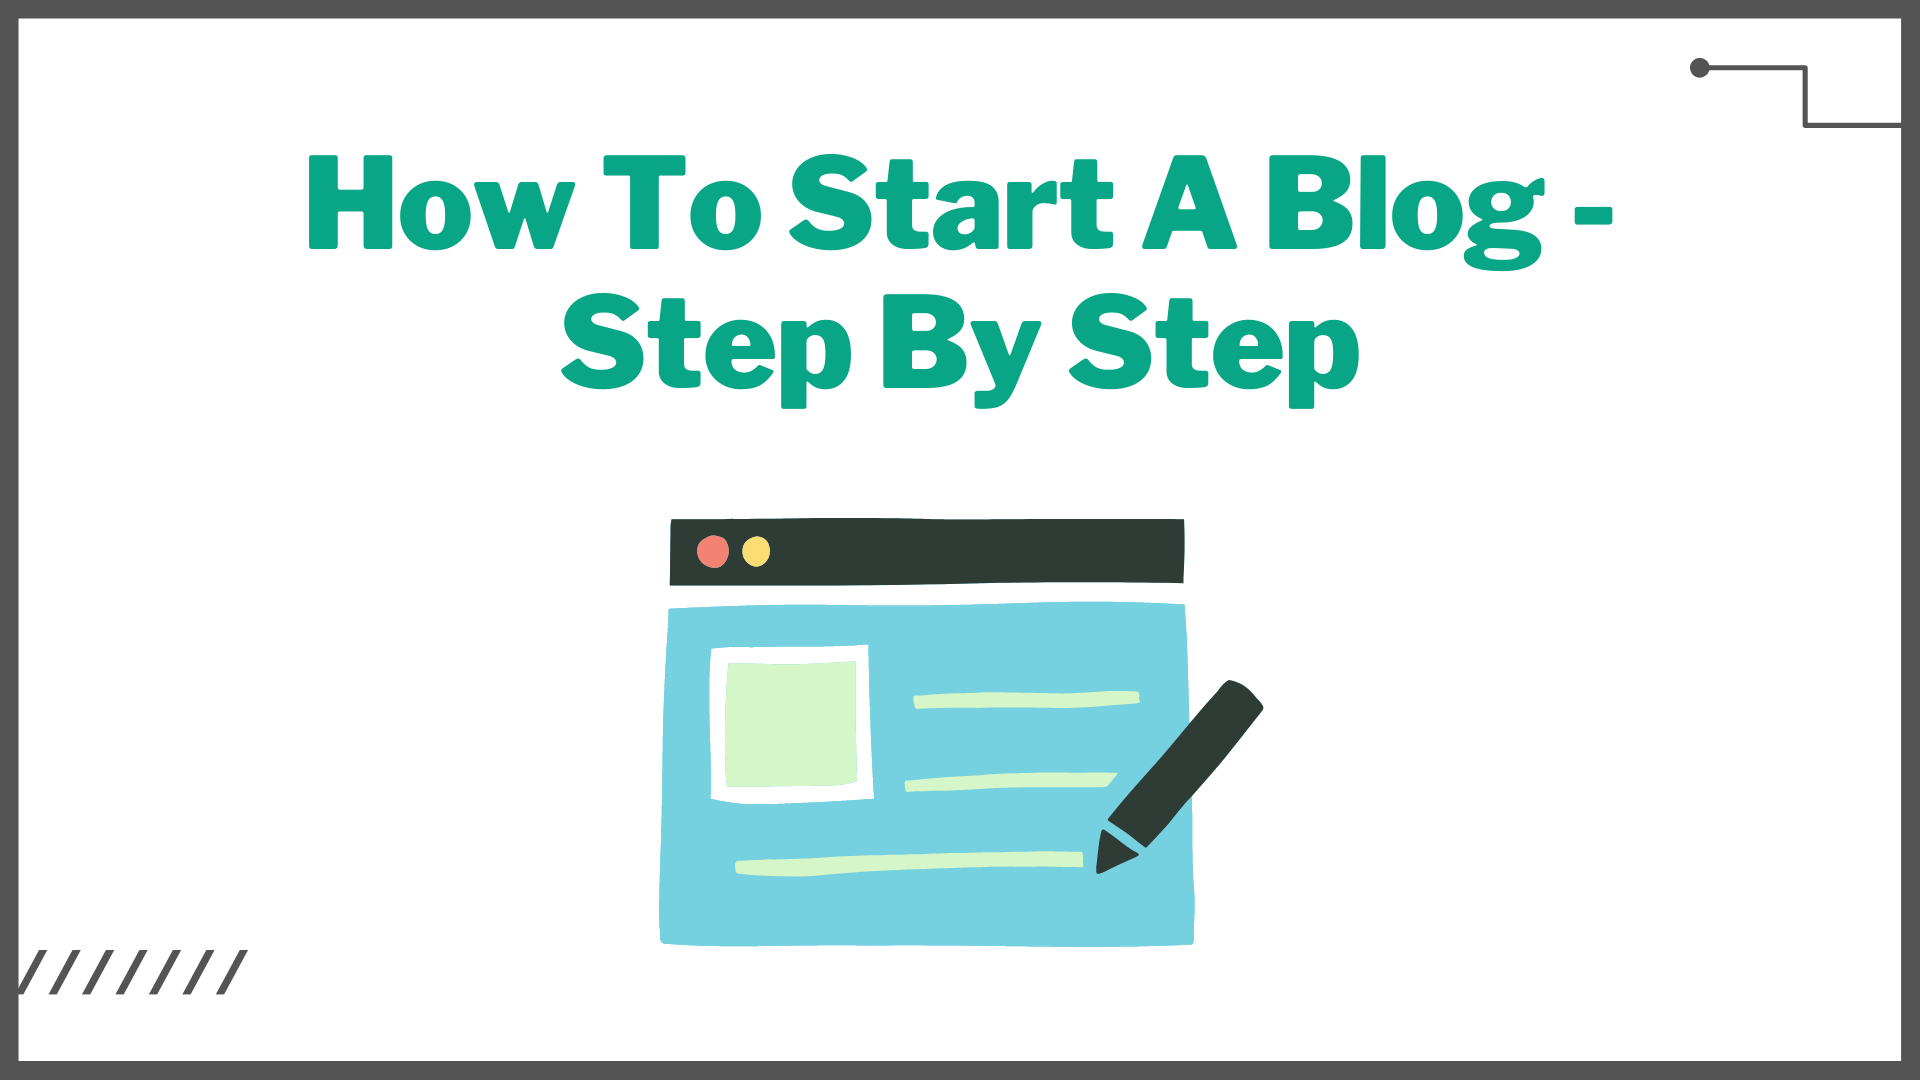 How To Start A Blog For Writing